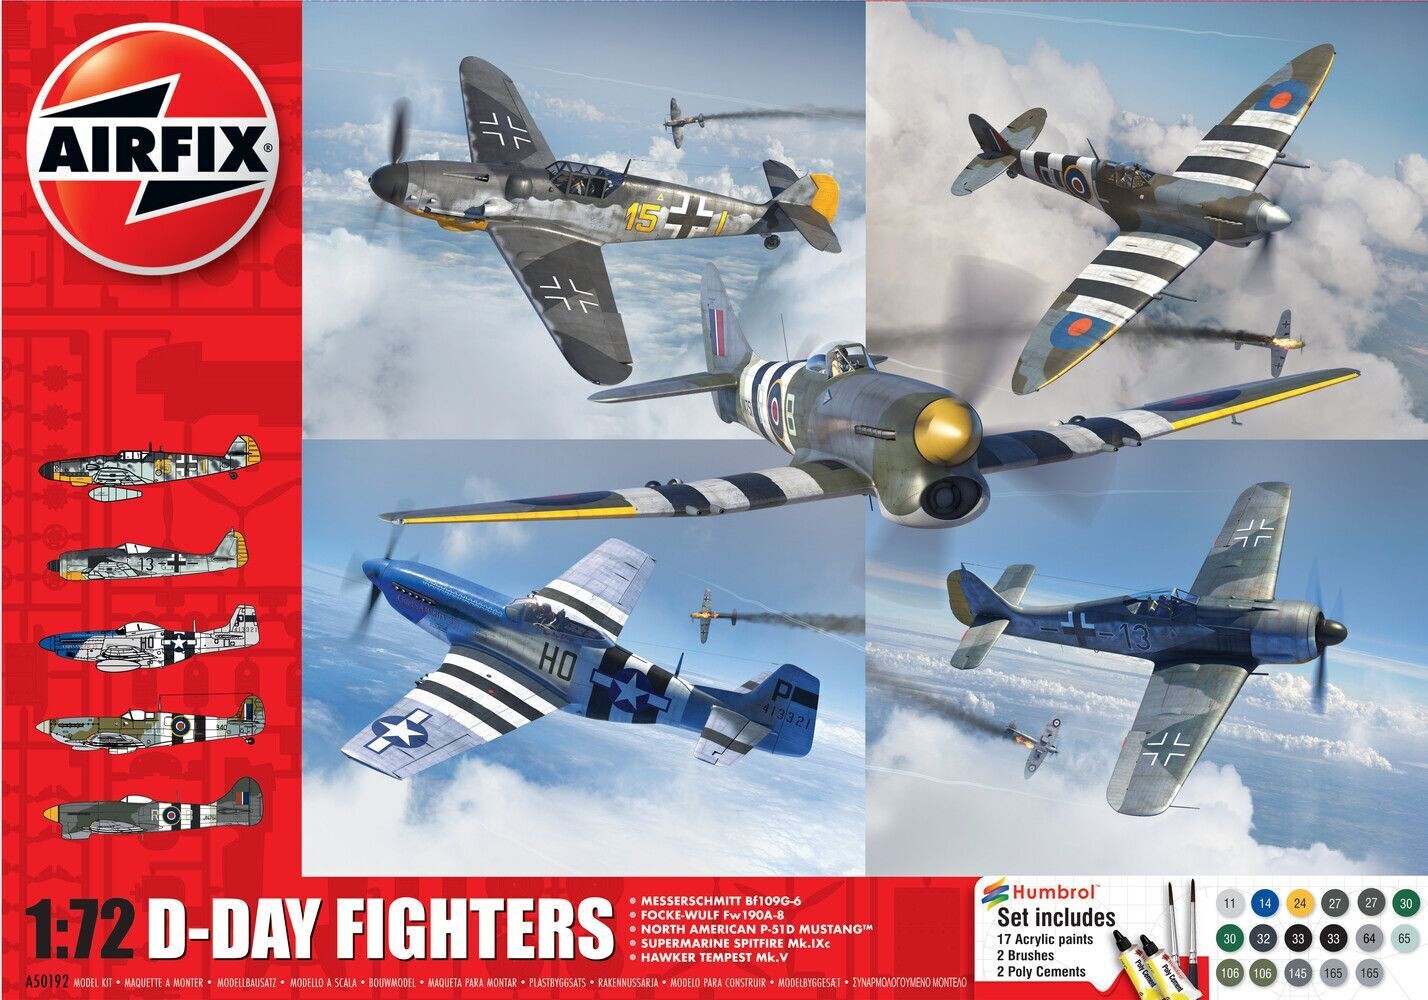 Airfix A50192 D-Day Fighters Gift Set 1:72 Scale Plastic Model Kit